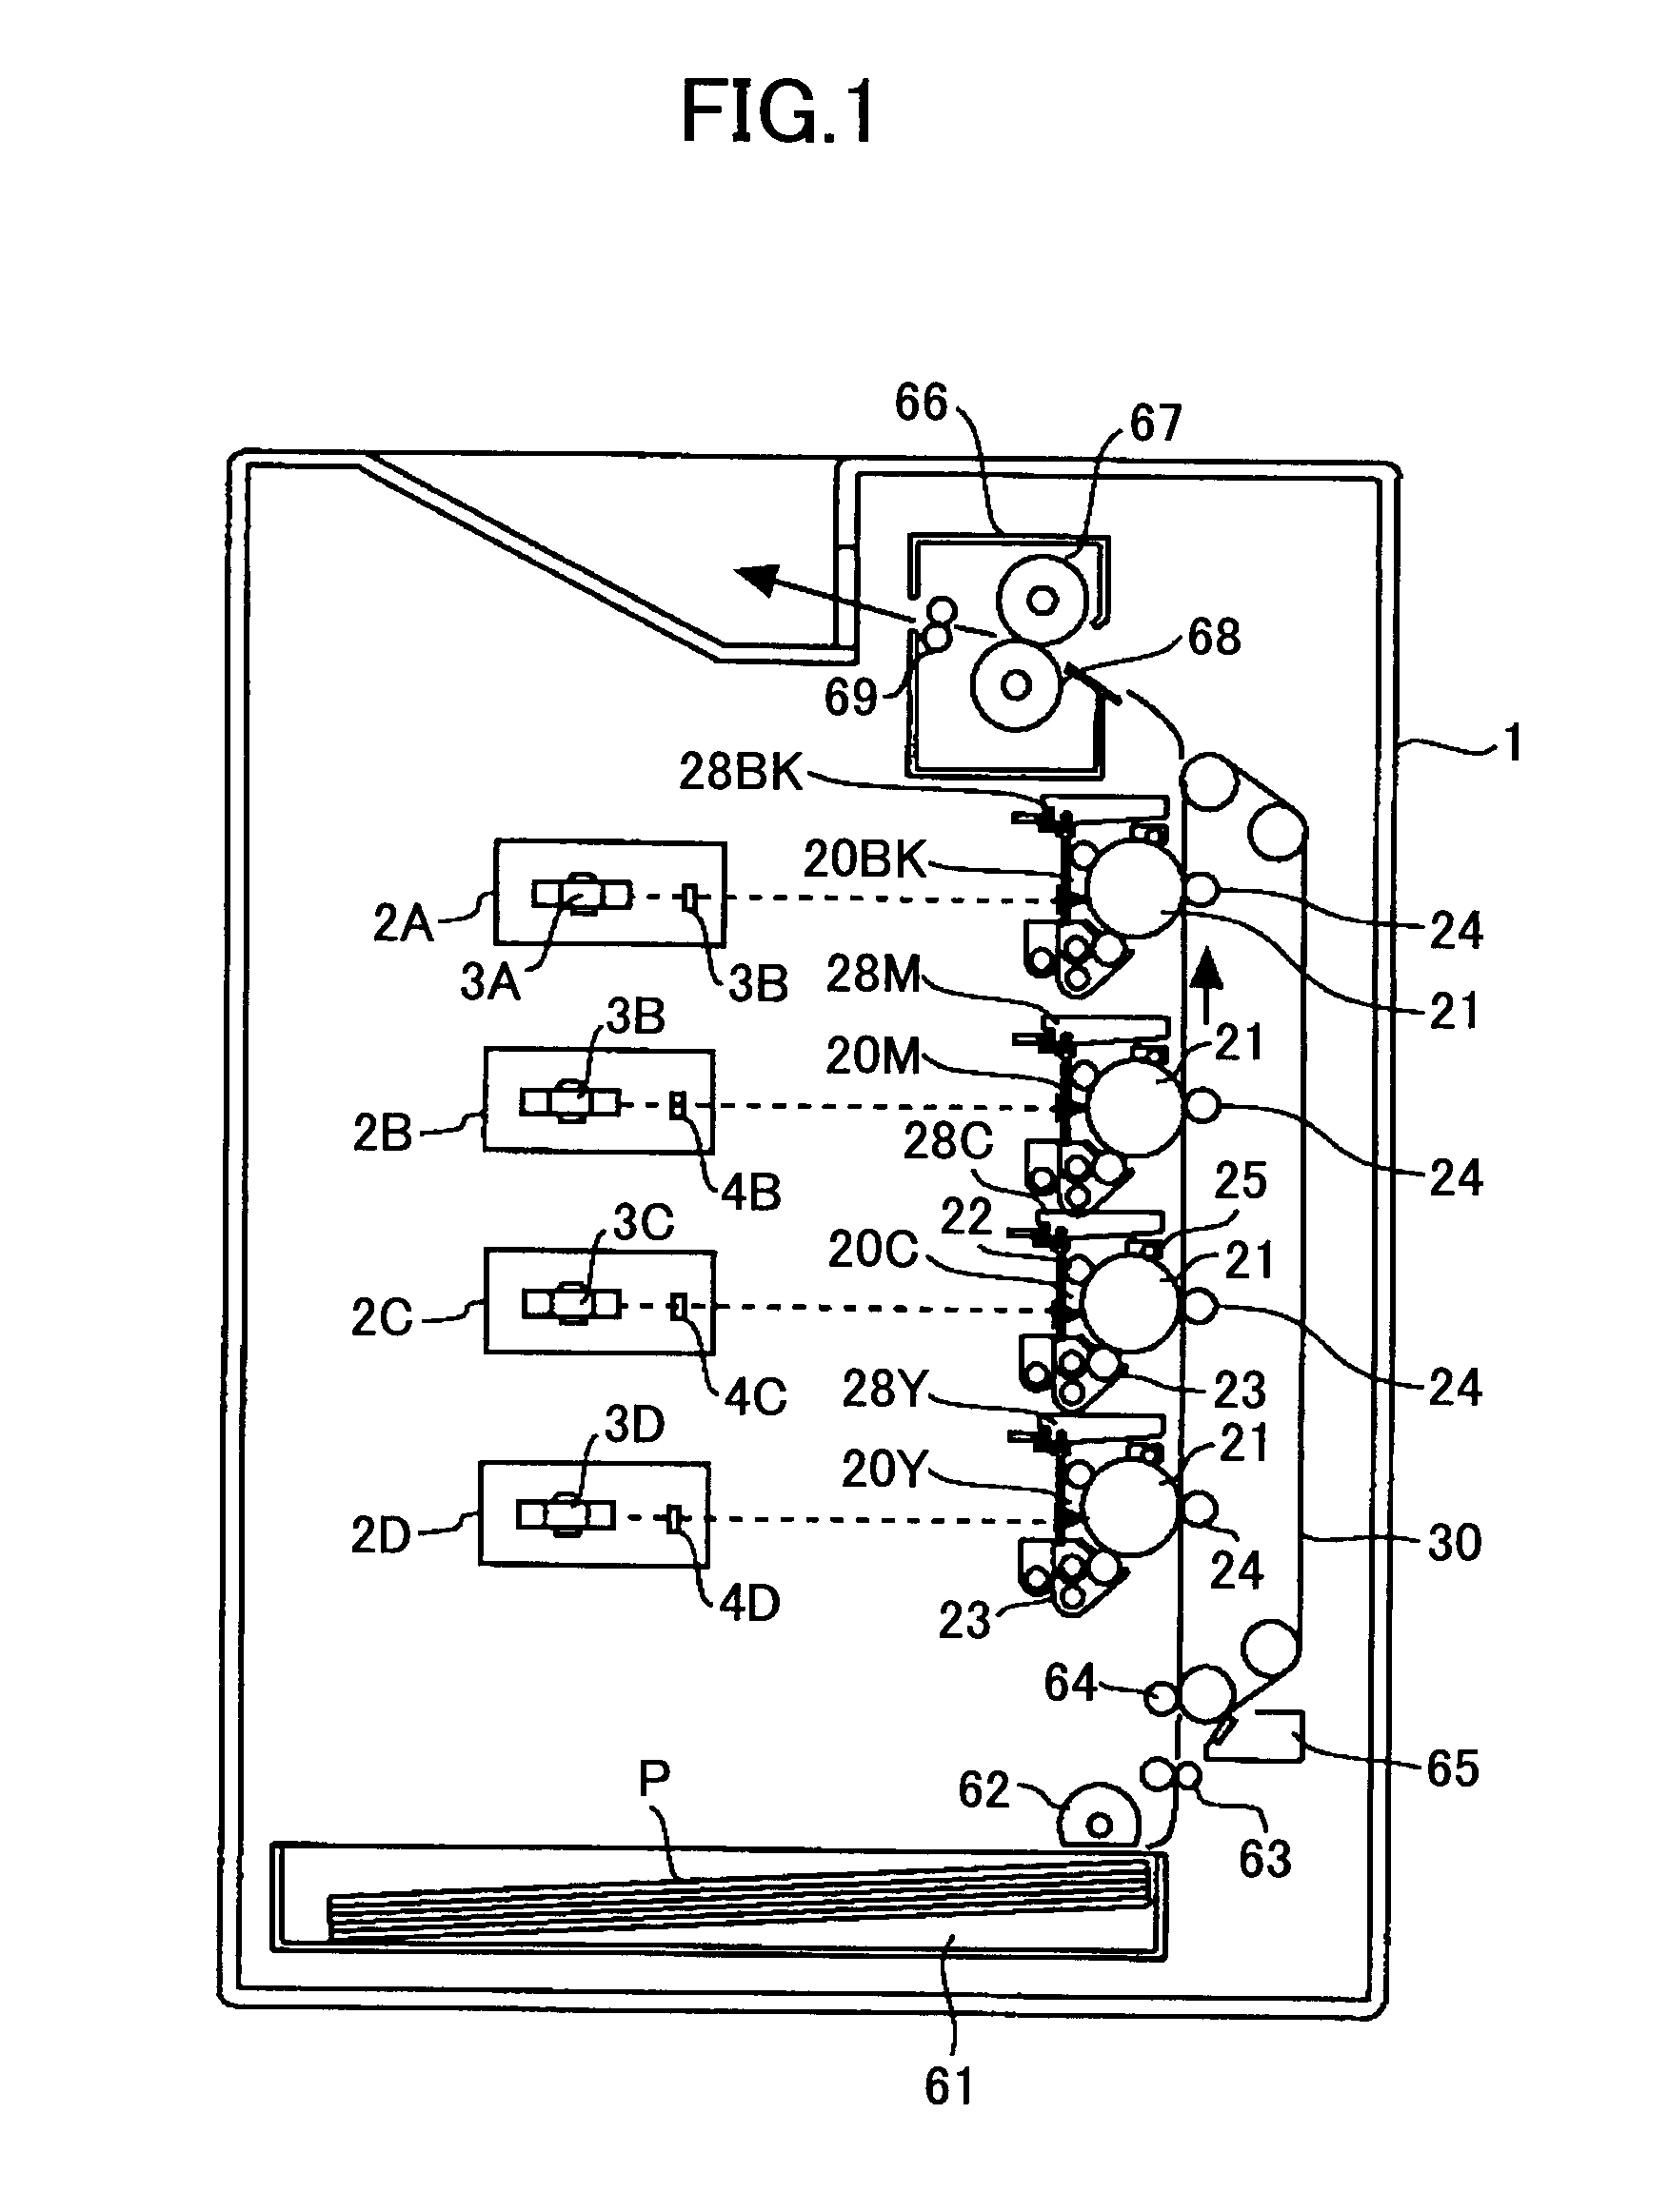 Developing unit, process cartridge, and image forming apparatus